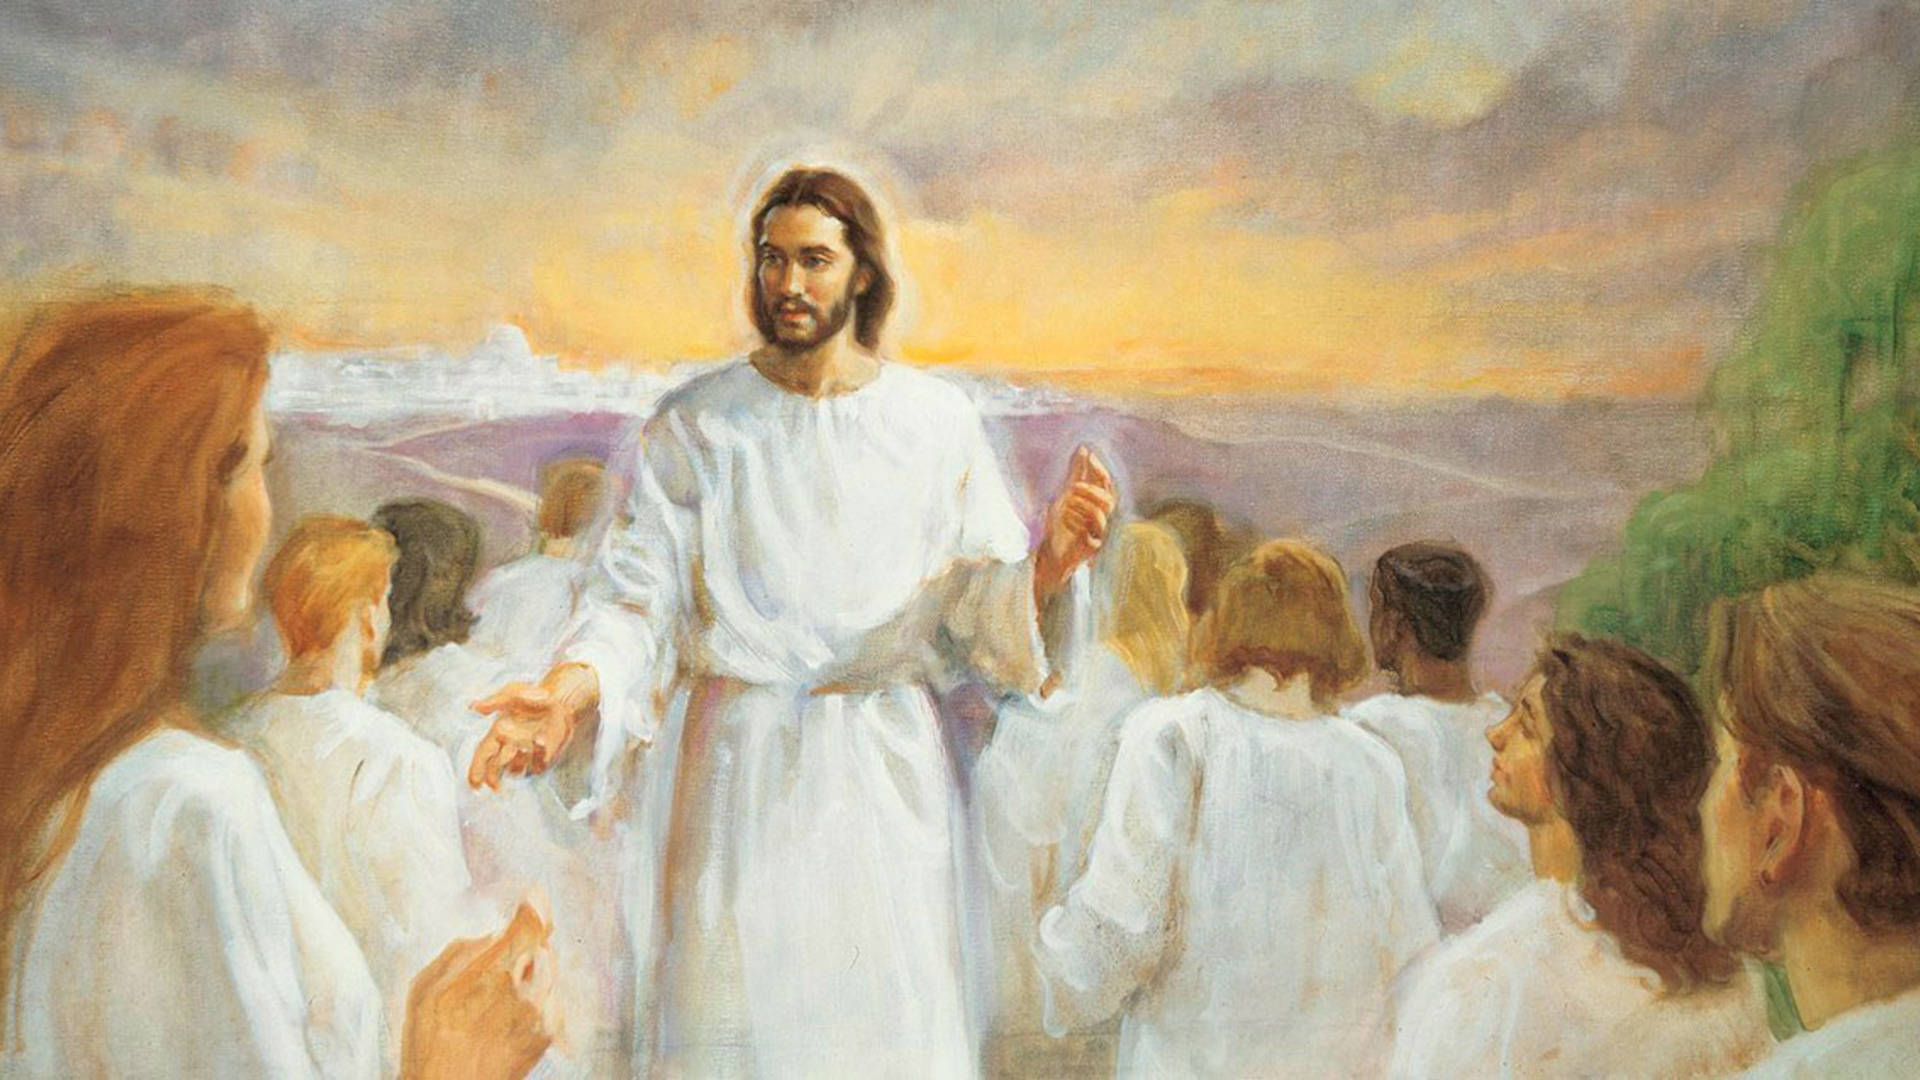 Keith Larson's painting, "The City Eternal," depicting Jesus Christ directing and welcoming people in white robes to a landscape and white city far behind him